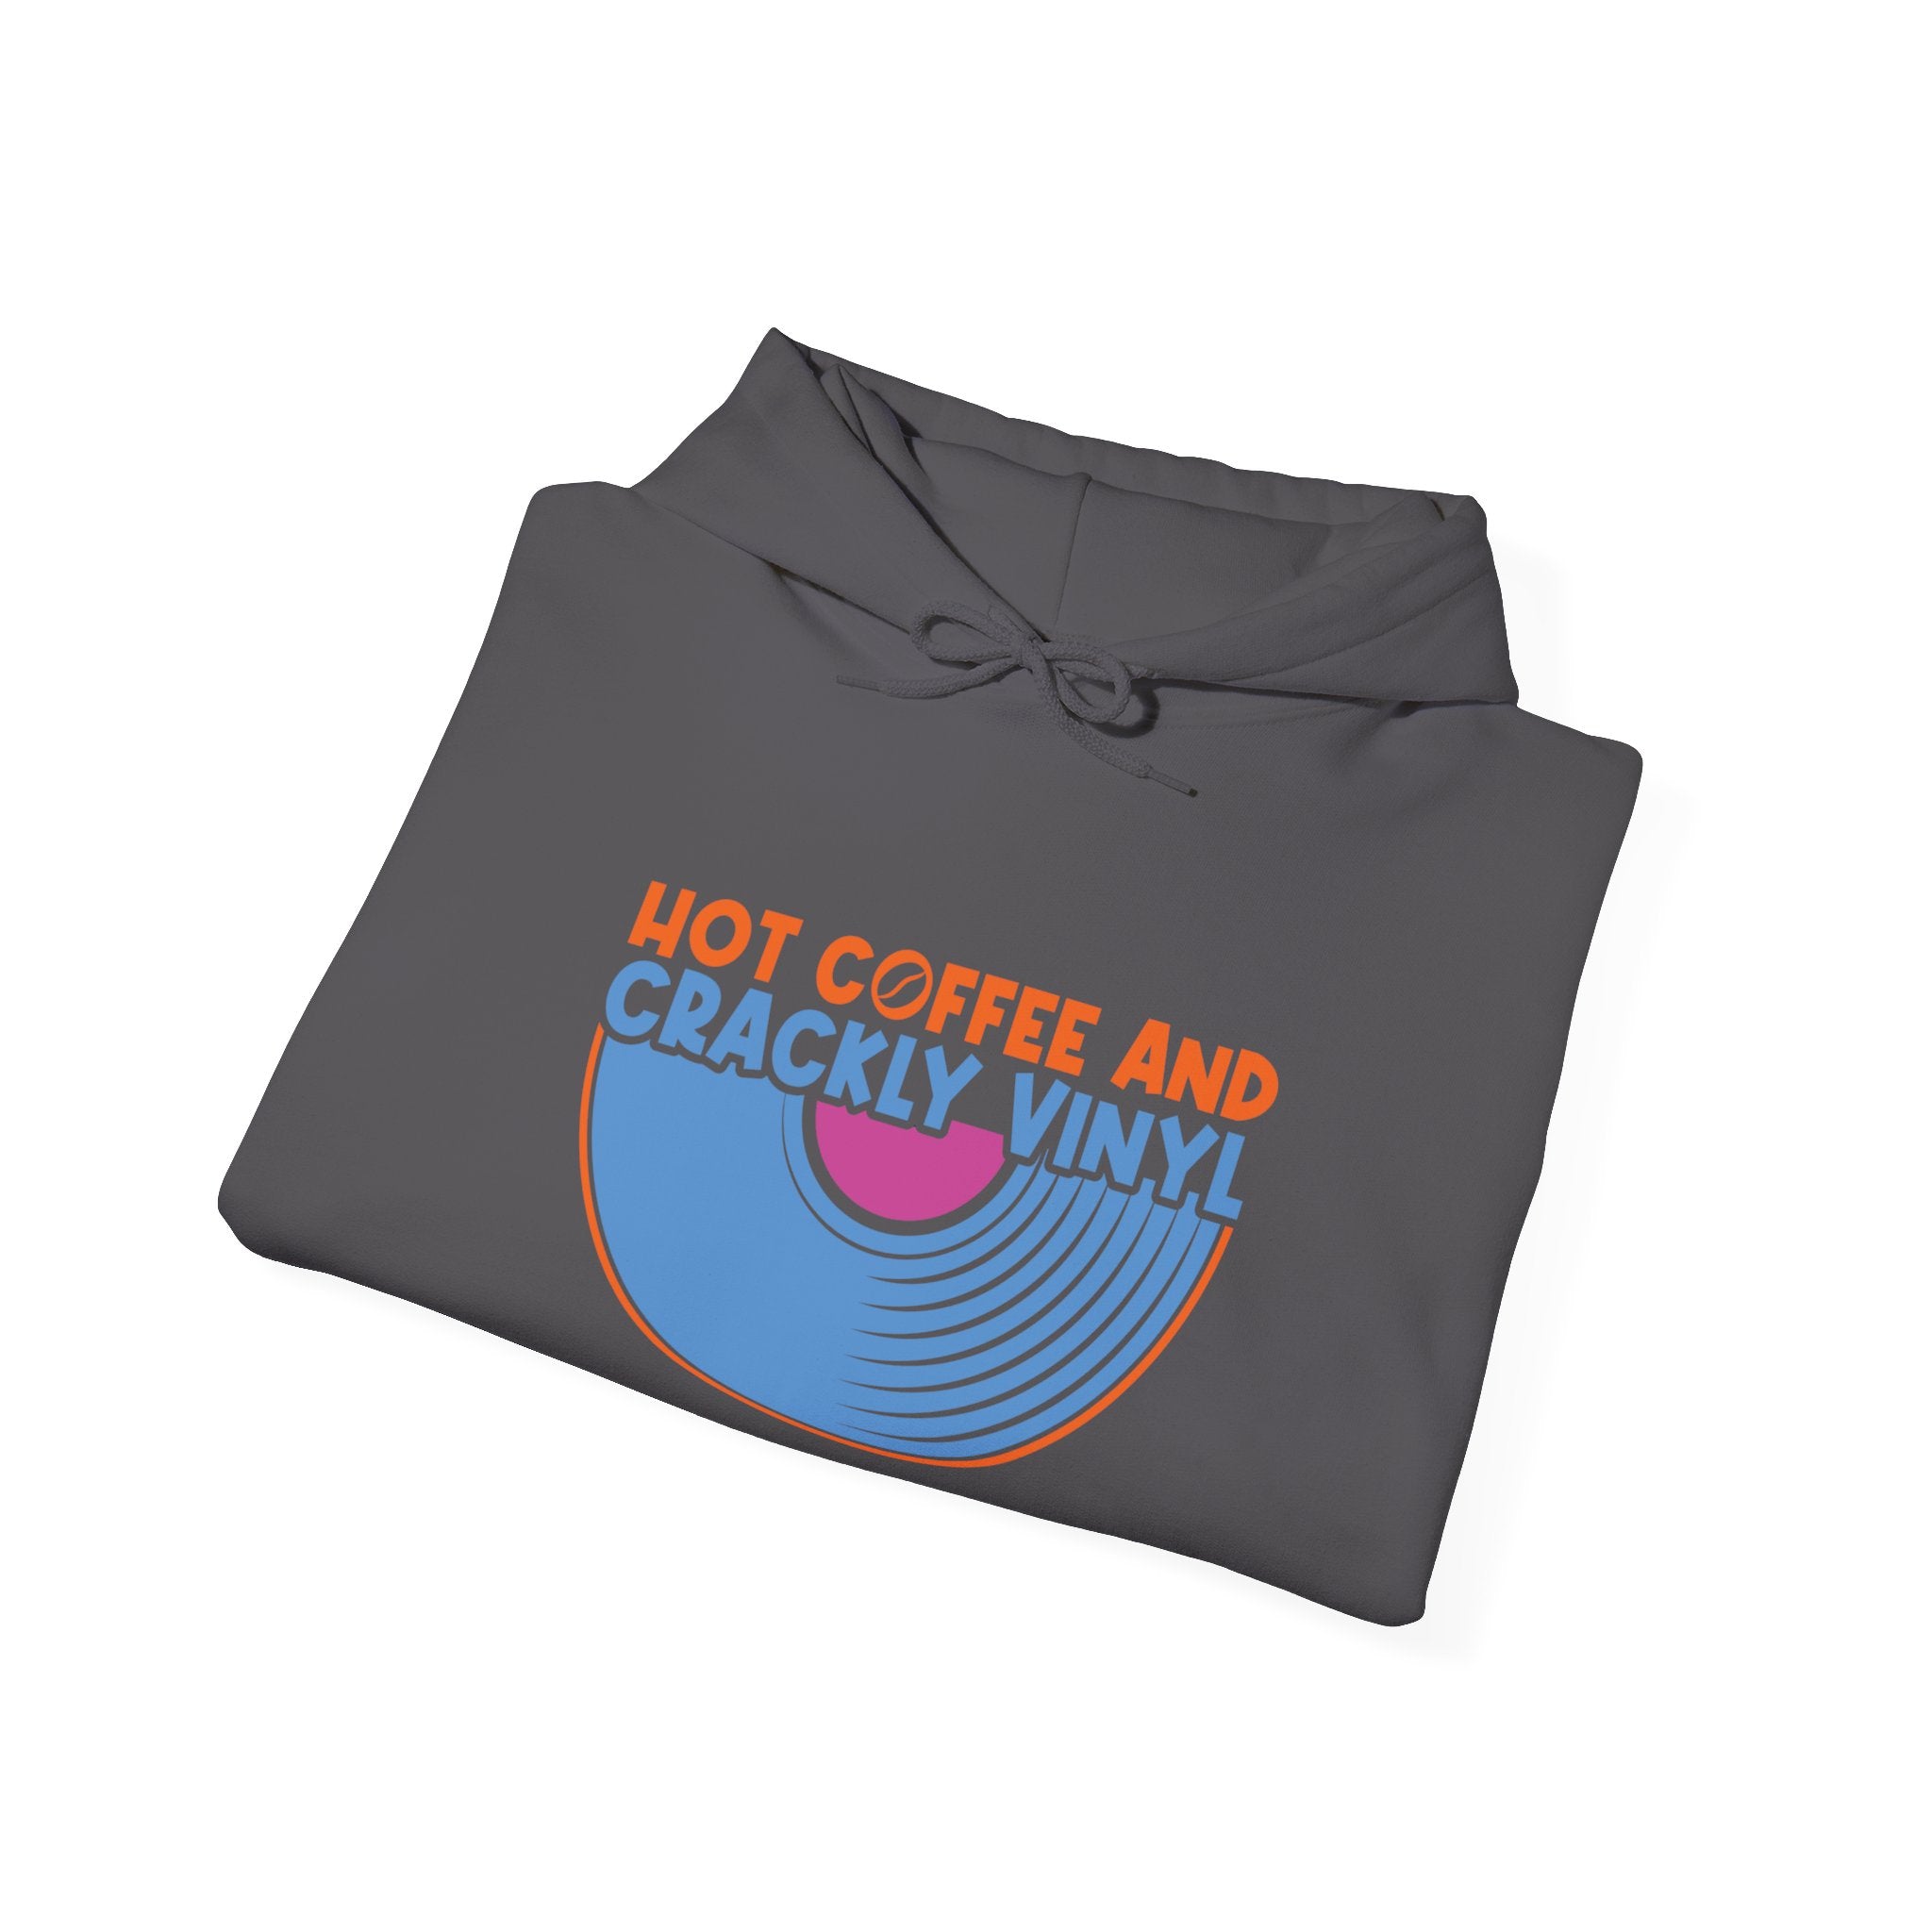 Hot Coffee & Crackly Vinyl Hoodie [ONE FOR THE MUSIC HEADS]